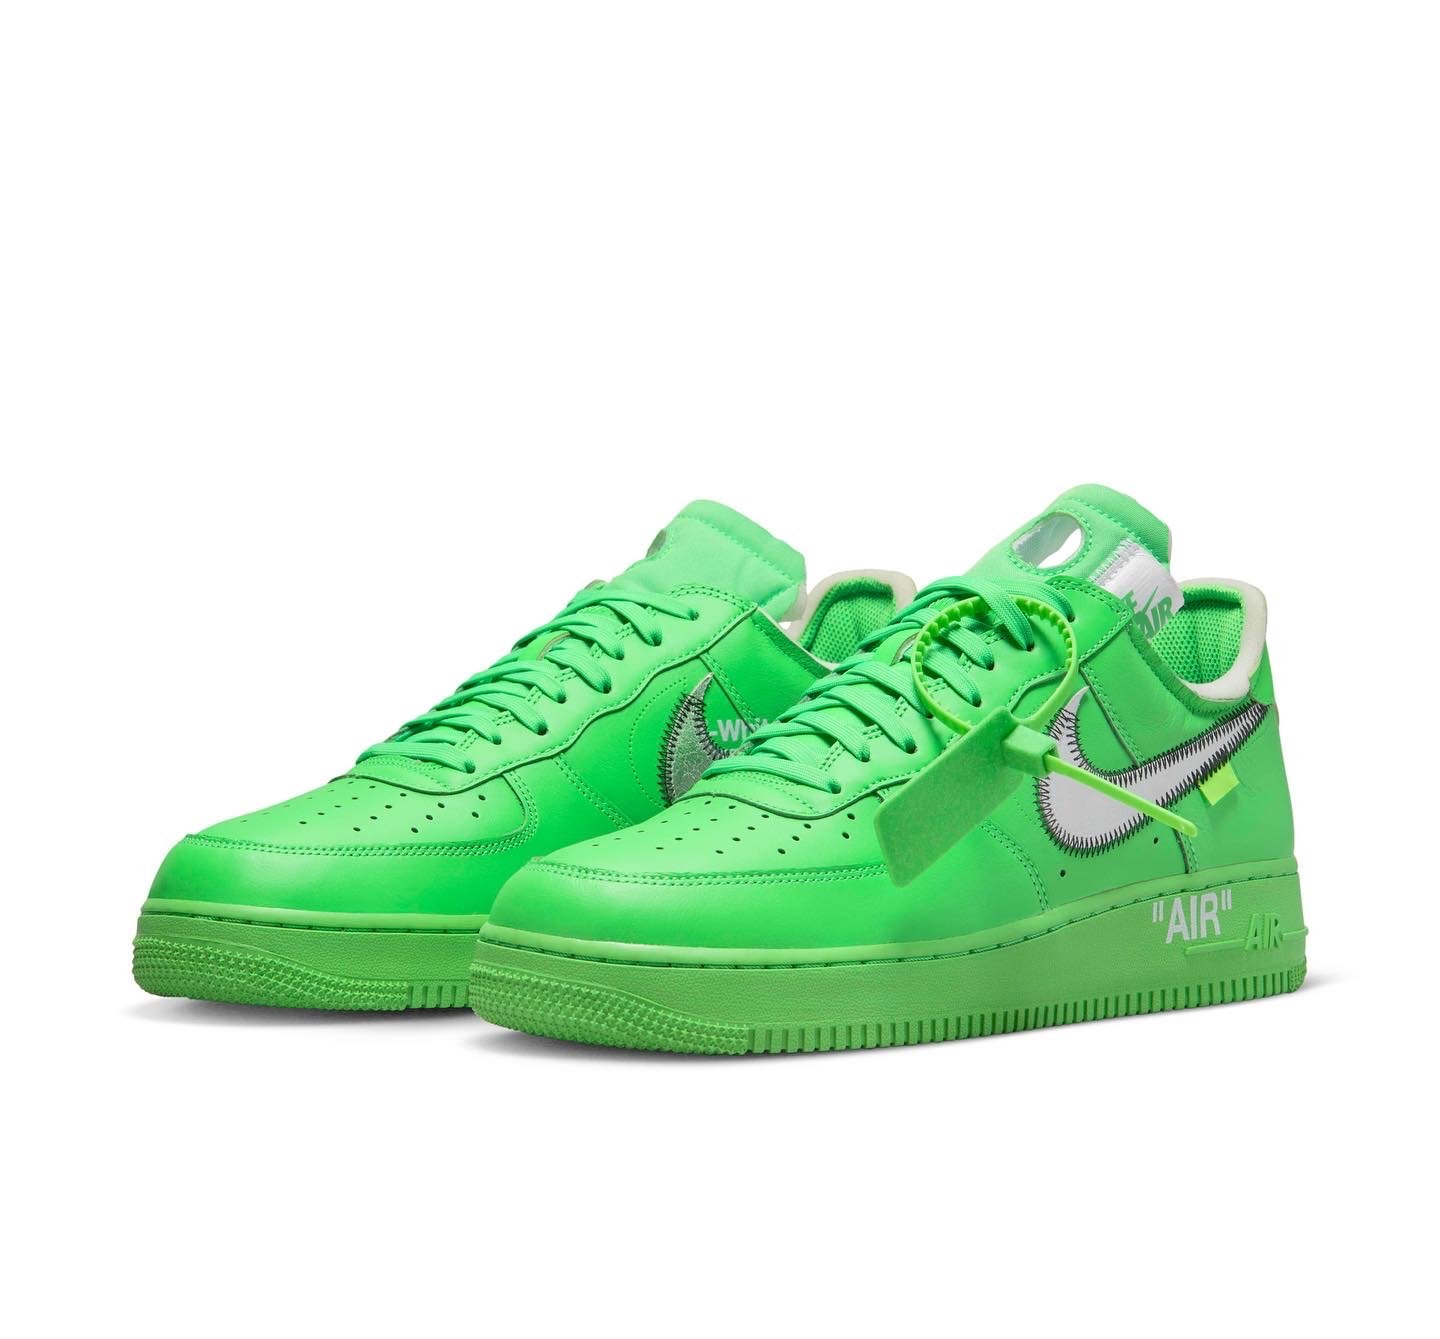 off white x nike air force 1 low light green spark dx1419 300 2